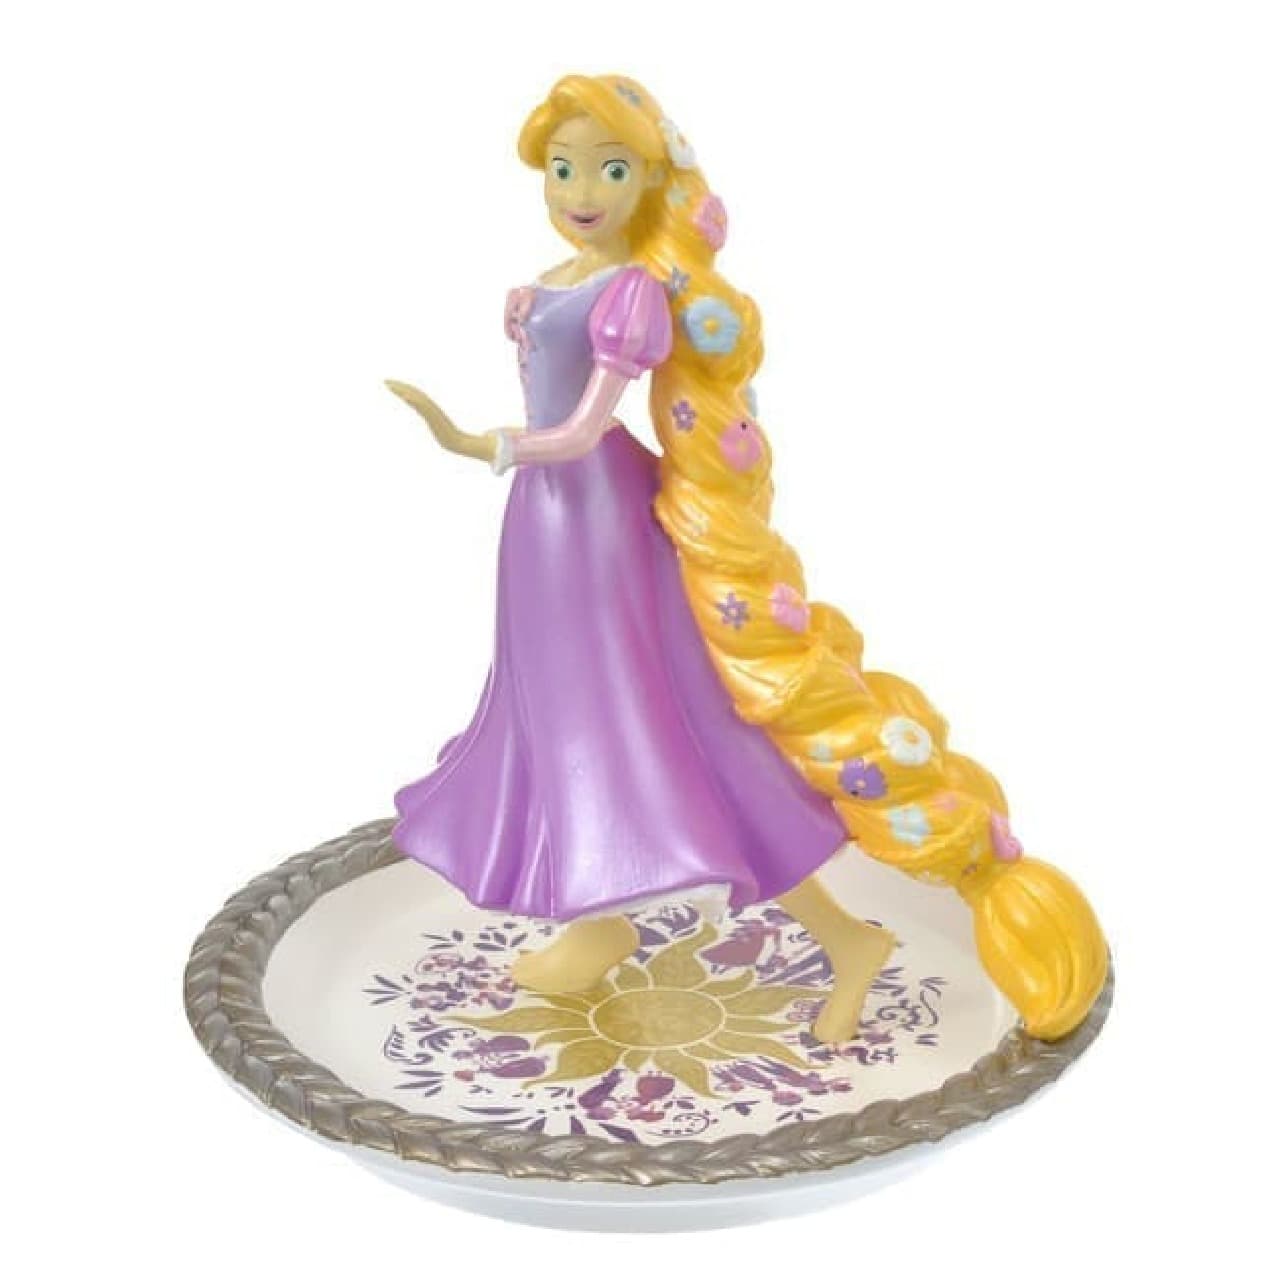 "Rapunzel on the Tower" 10th Anniversary Goods at Disney Store --Beautiful Eyeshadow Palettes, Figures, etc.